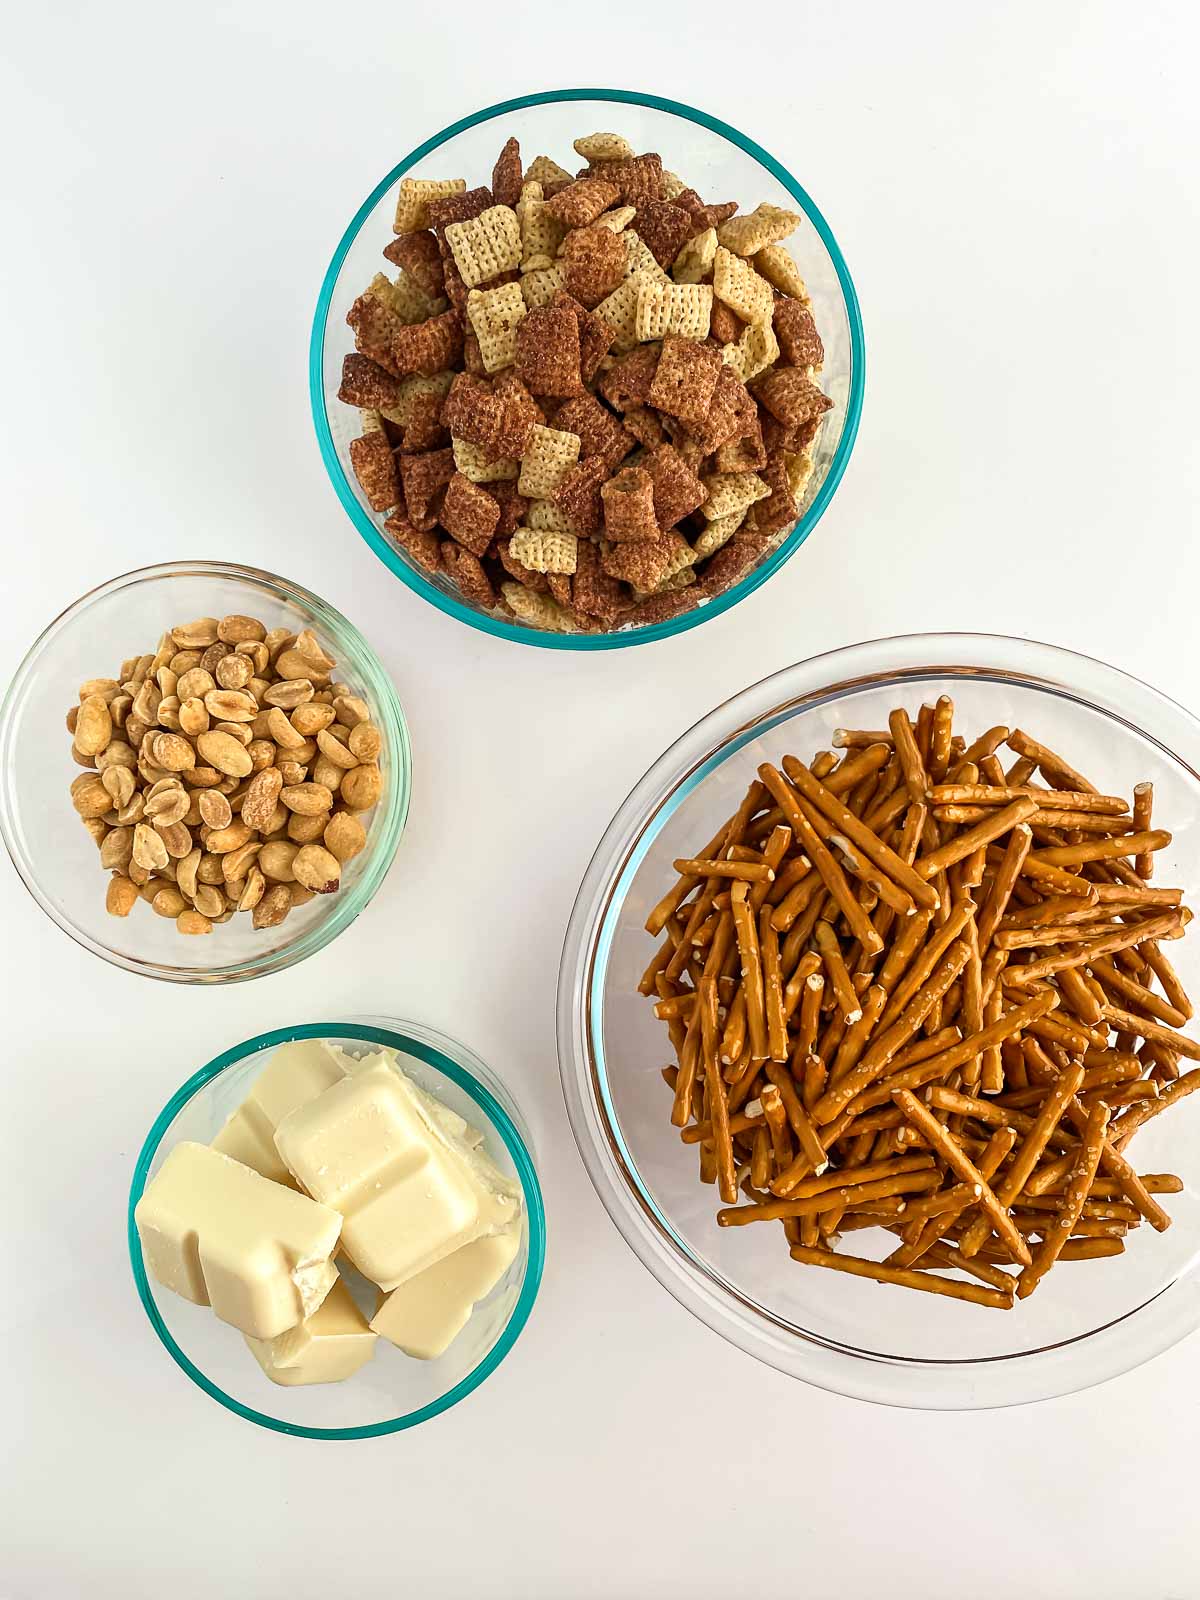 four glass bowls with pretzel sticks, chex cereal, peanuts and white chocolate squares